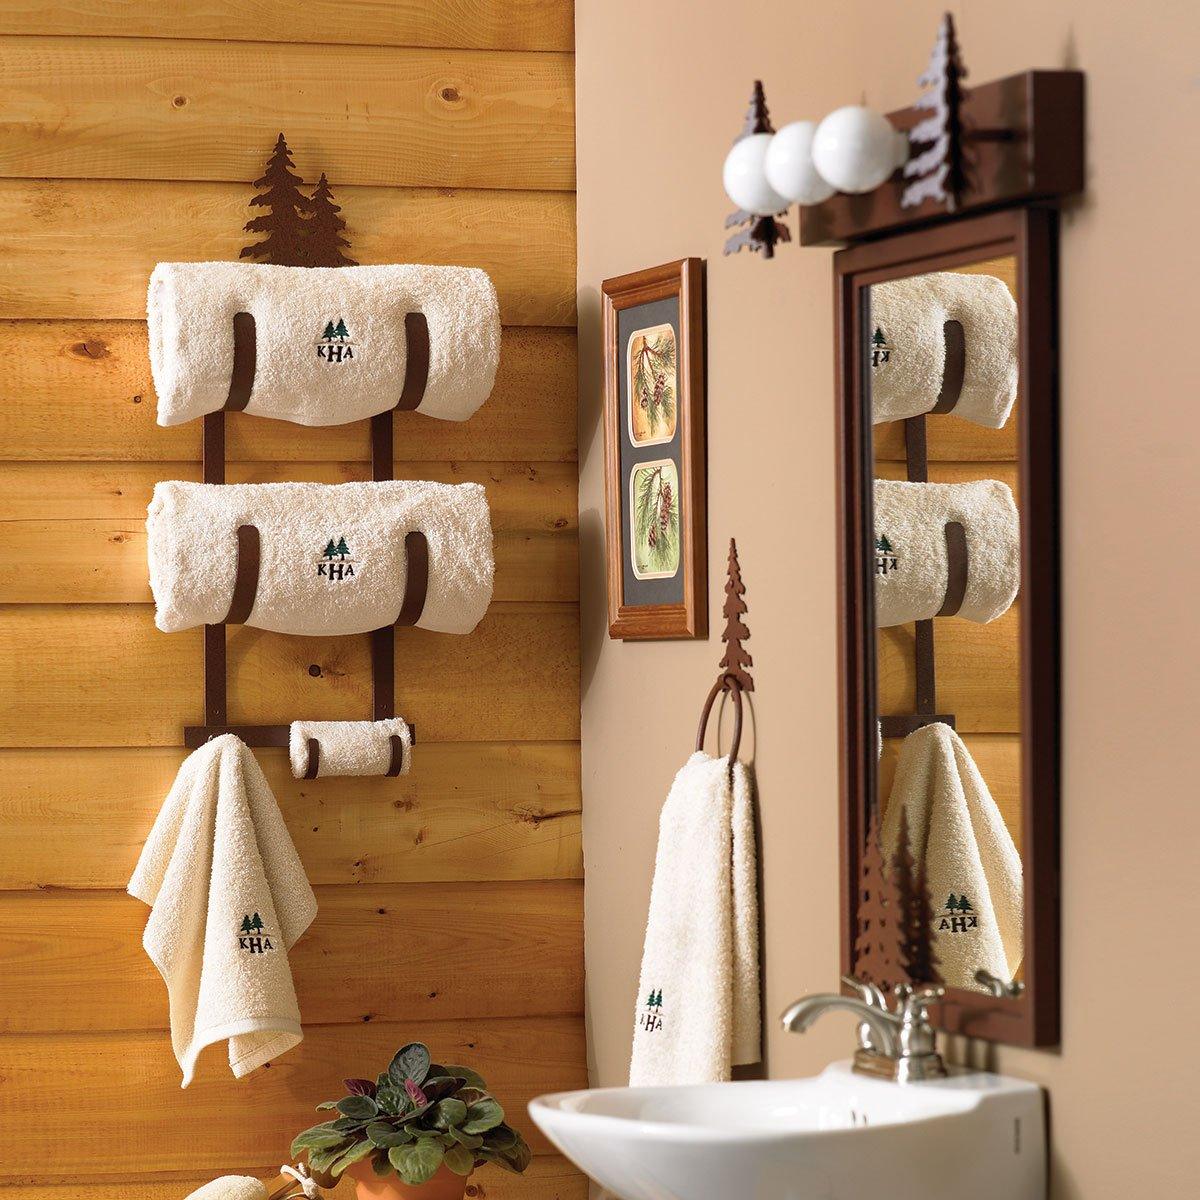 How to Spruce up your Cabin with Rustic Bathroom Décor – Wild Wings